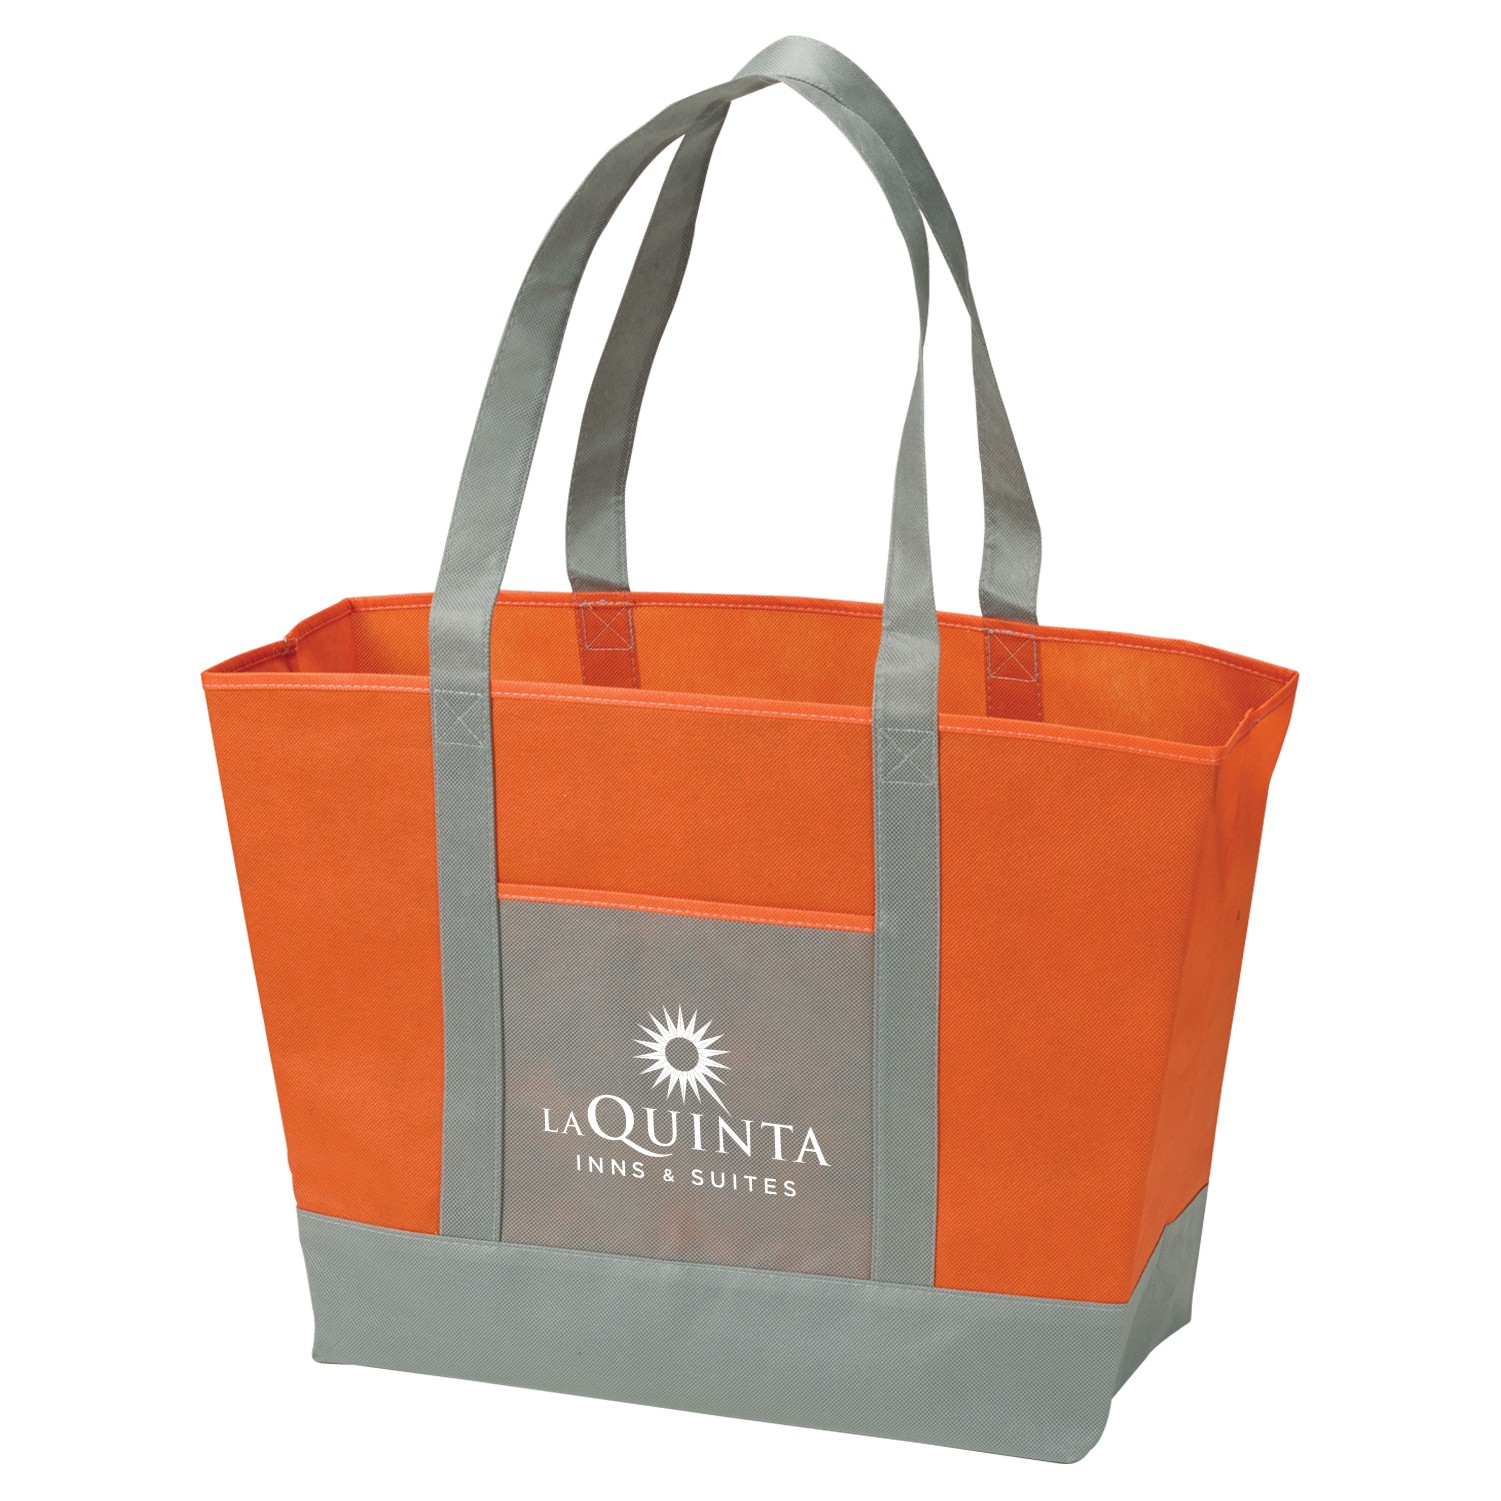 Lake Powell Non-Woven Boat Tote Bag | Evans Manufacturing